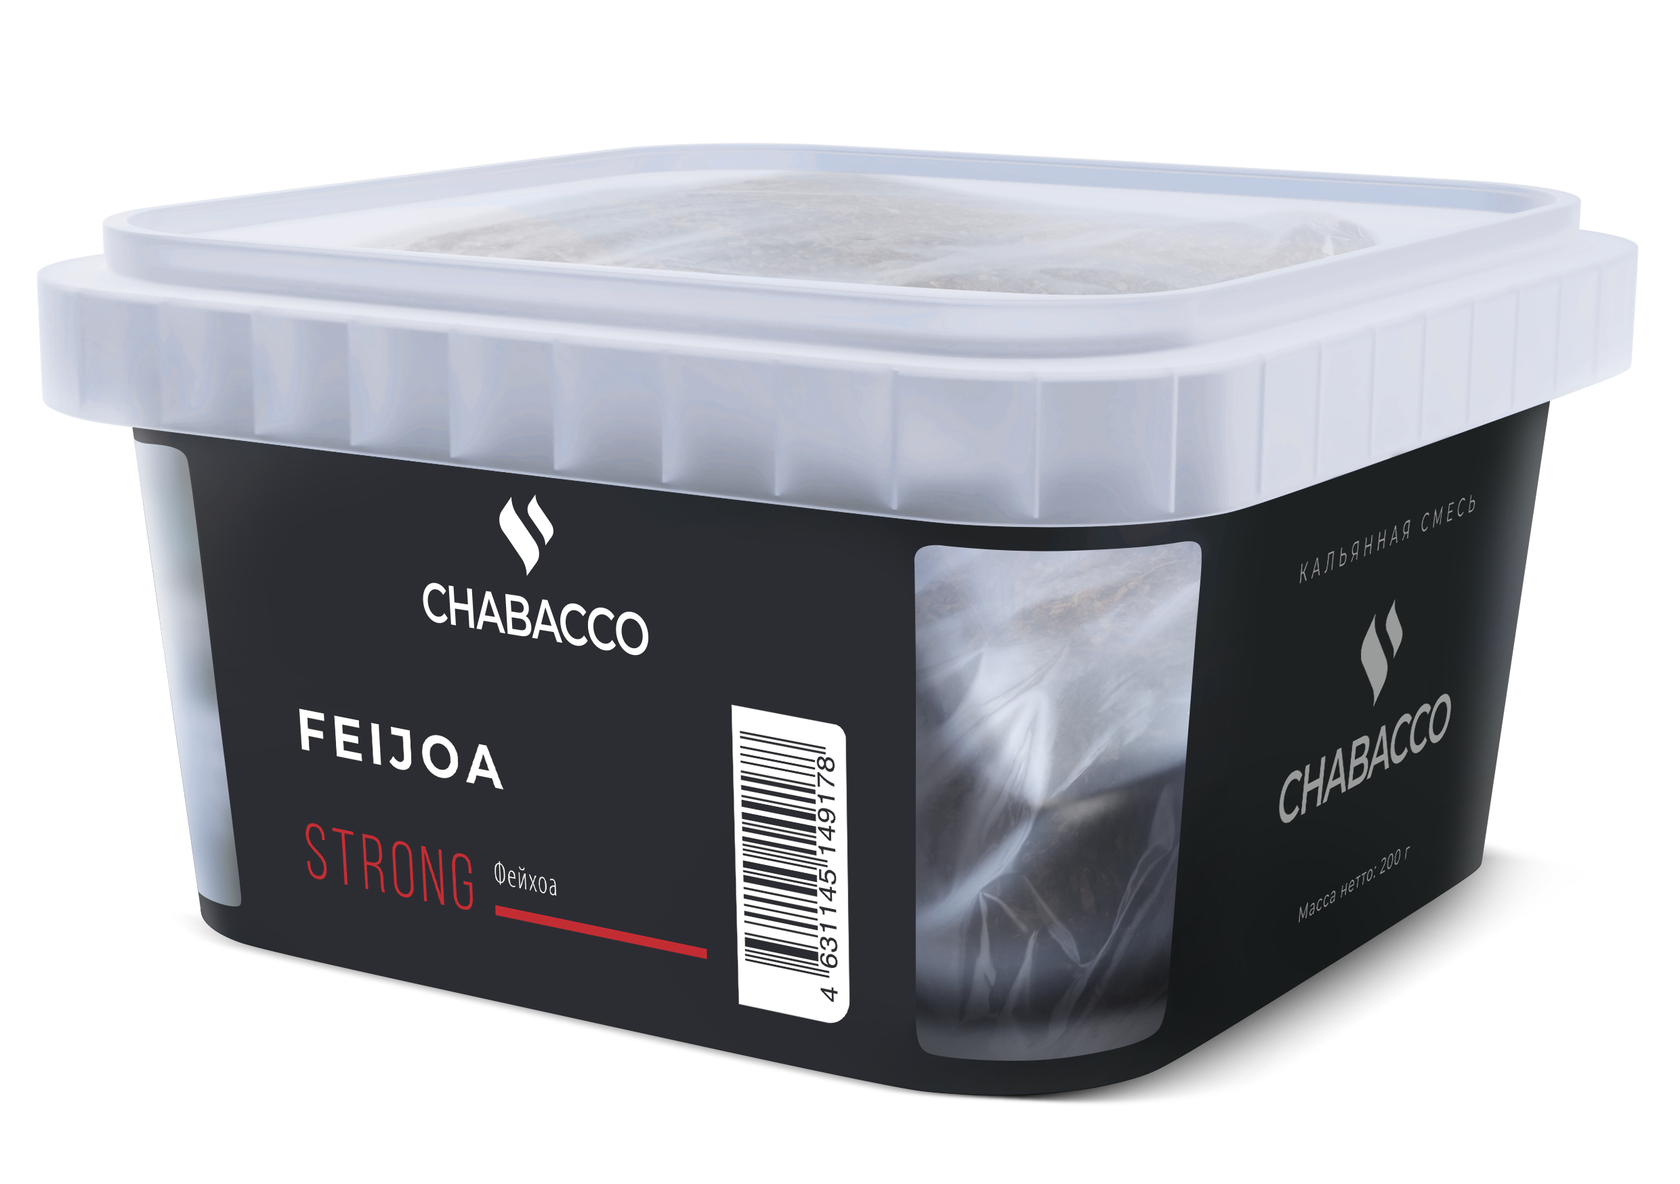 Chabacco - STRONG - FEIJOA - 200 g